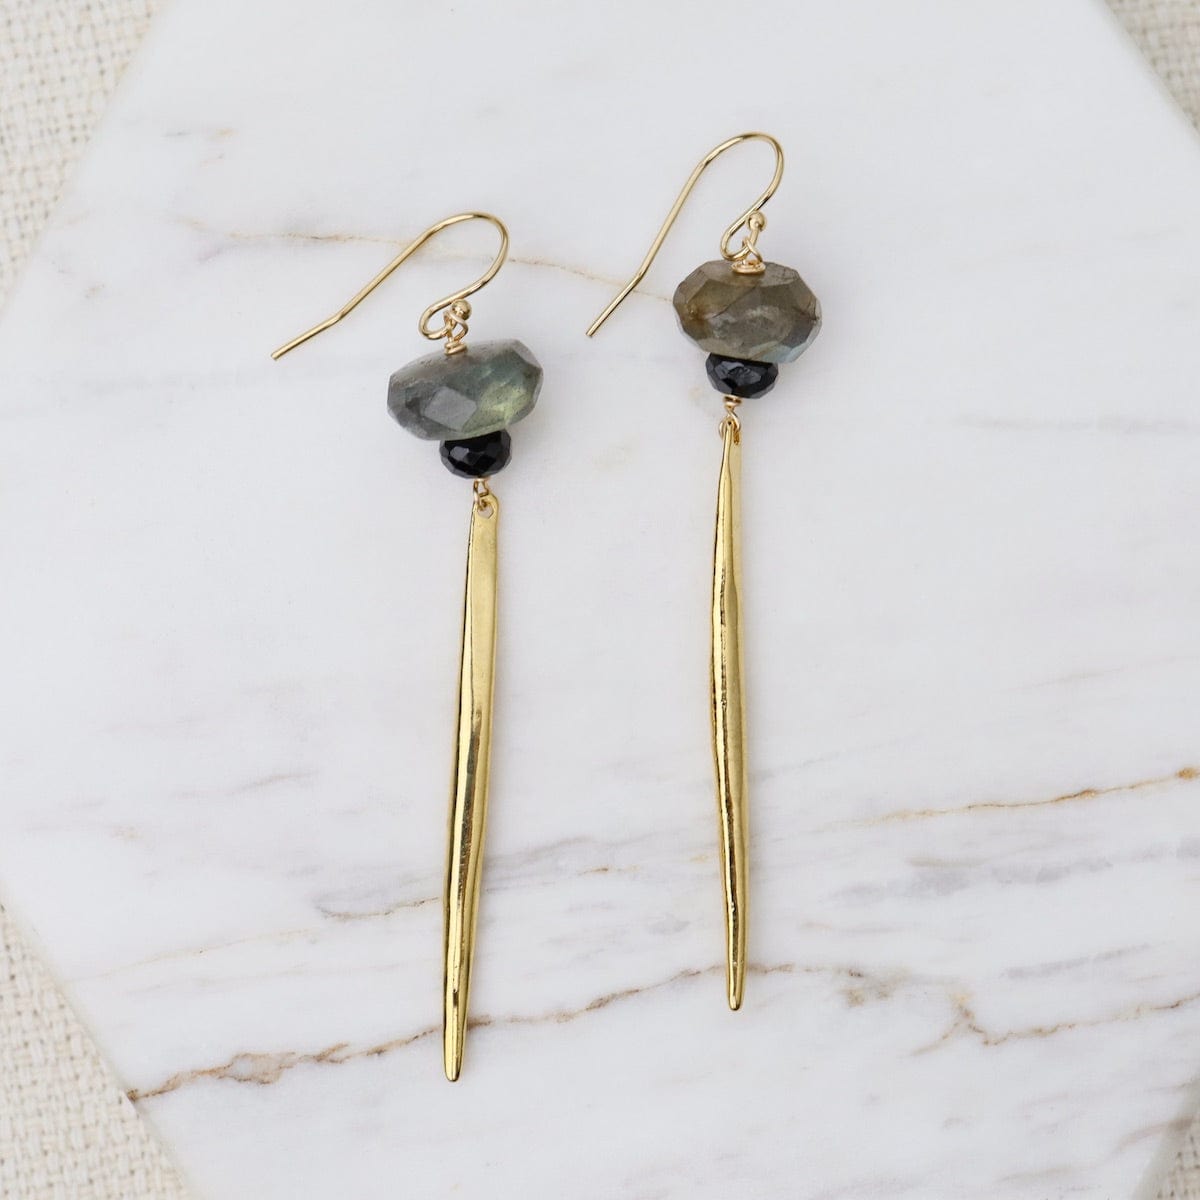 NKL-GF Icicle Earrings with Flat Semi Precious Stones - L